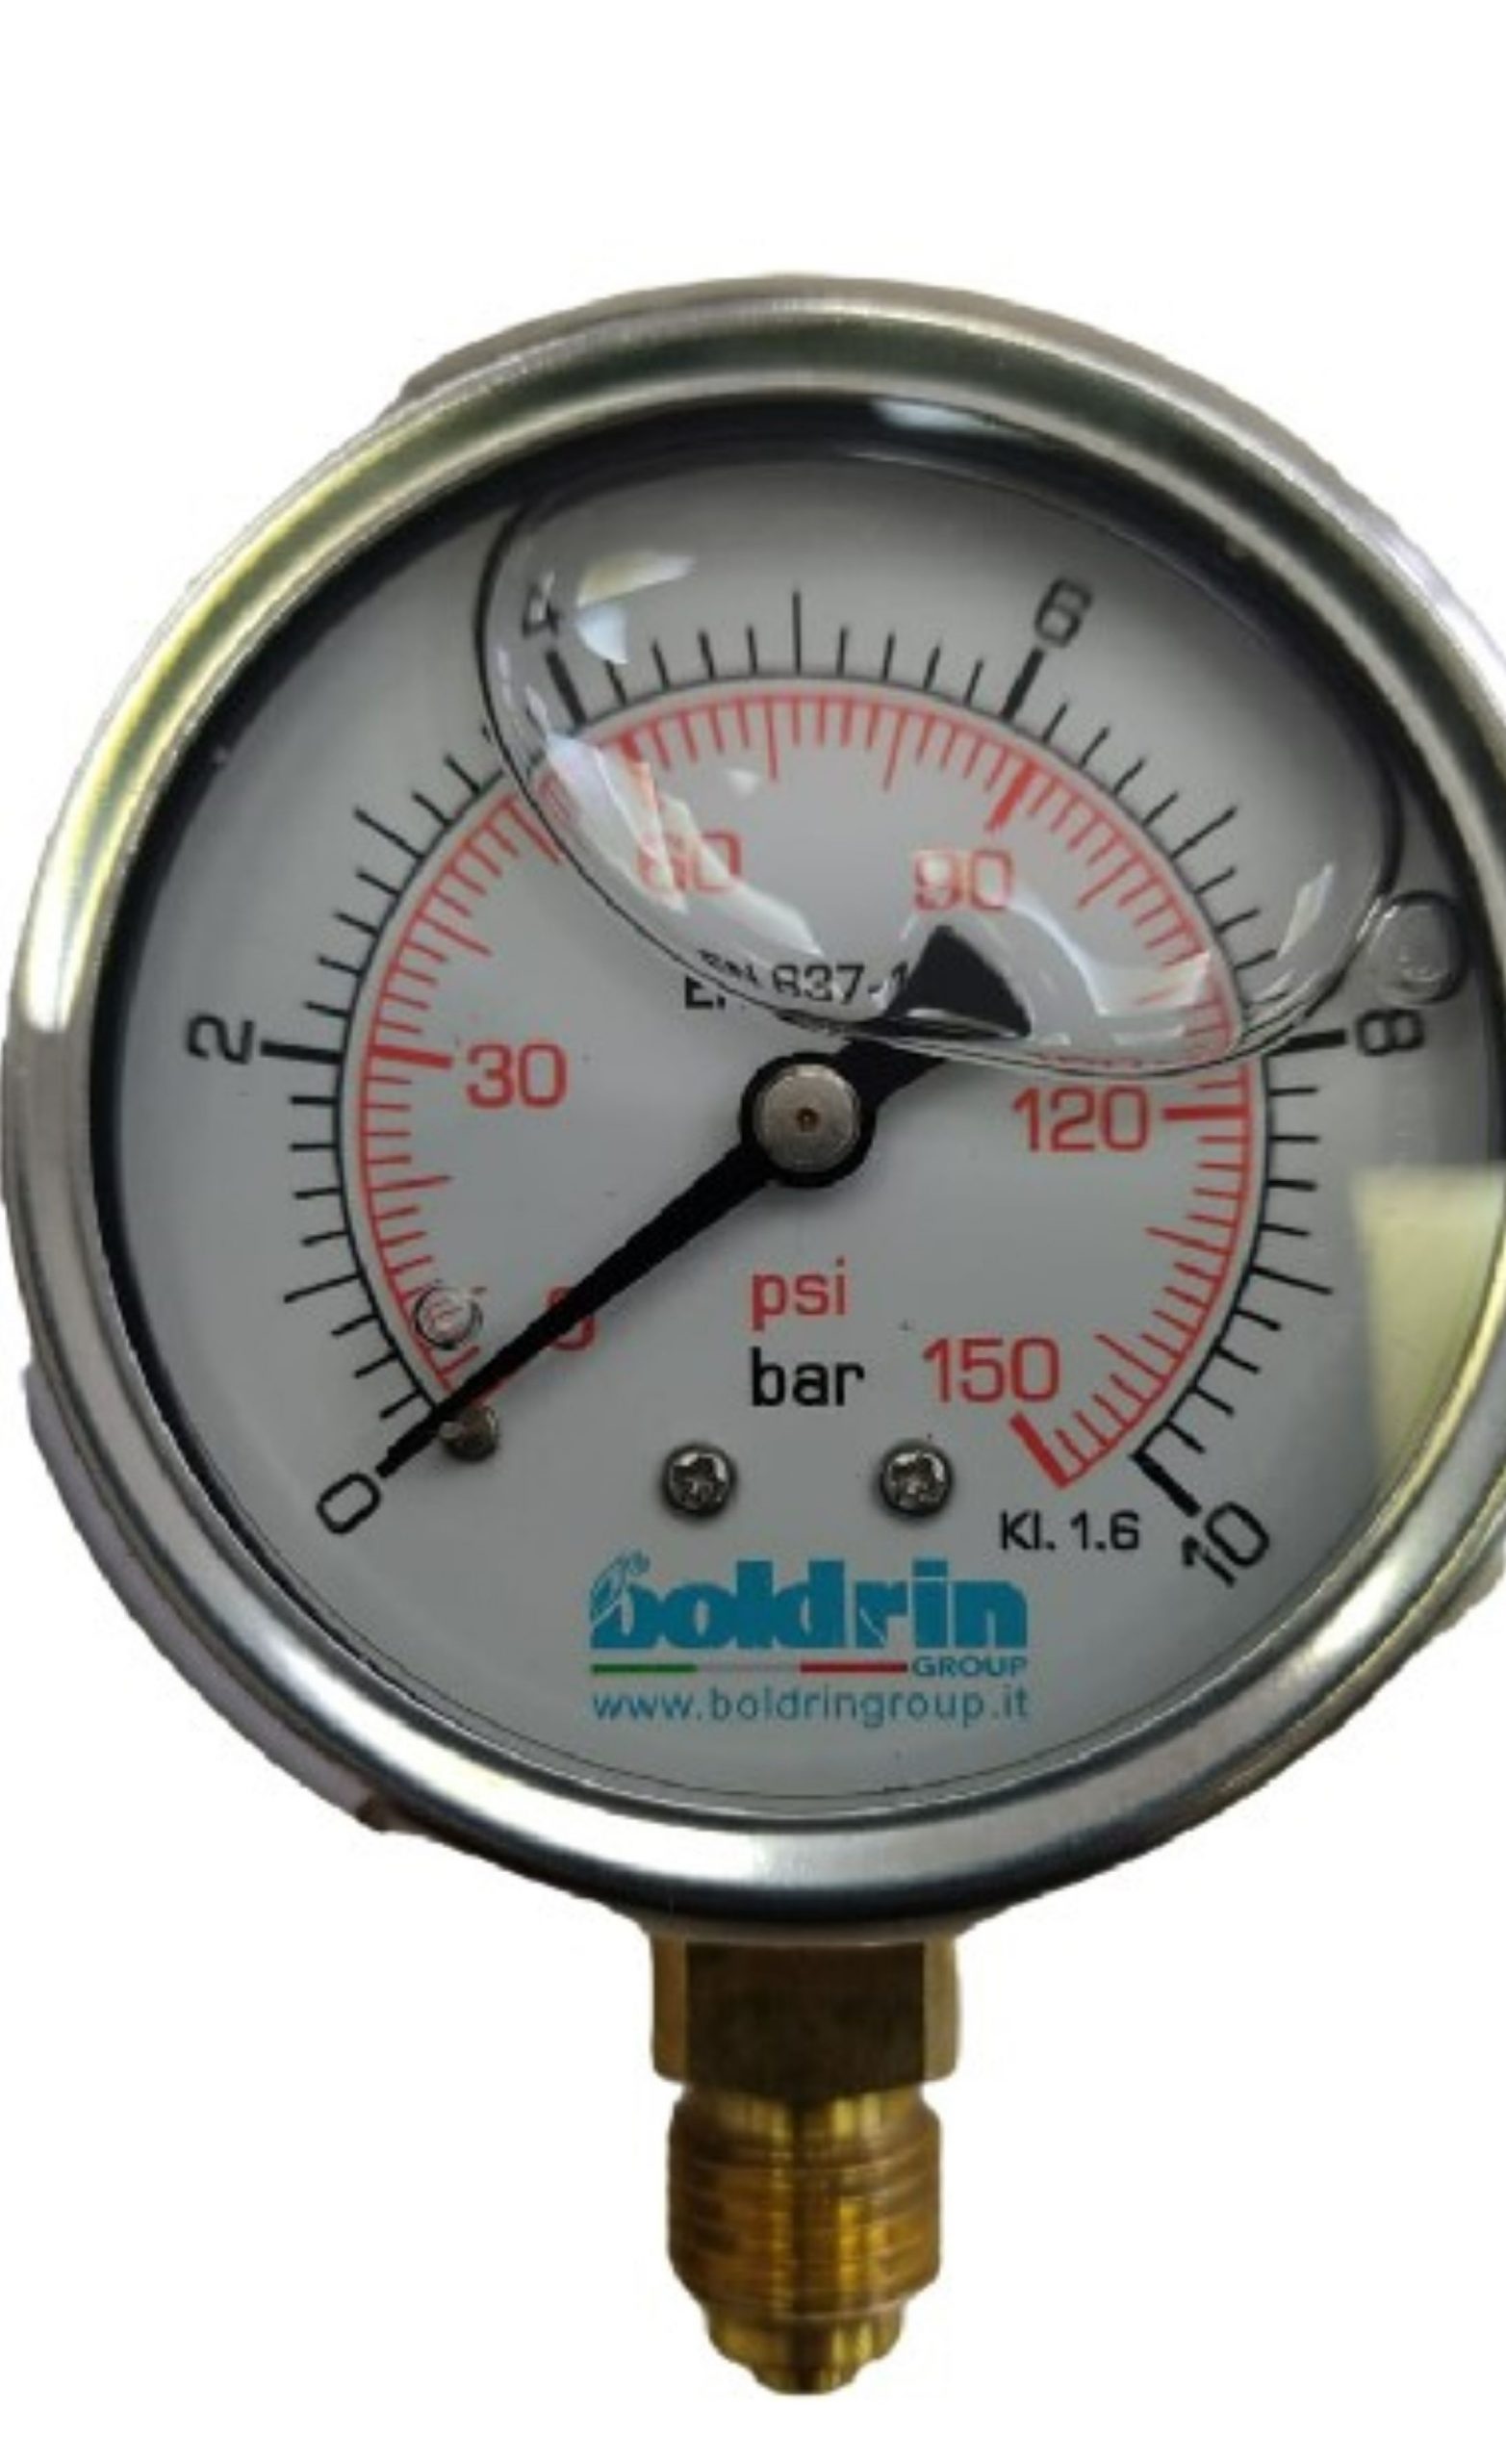 PRESSURE GAUGE 0-10 BAR DIAMETER 2 1/2 Inches  CONNECTION 1/4 Inches from Gas Equipment Company Llc Abu Dhabi, UNITED ARAB EMIRATES